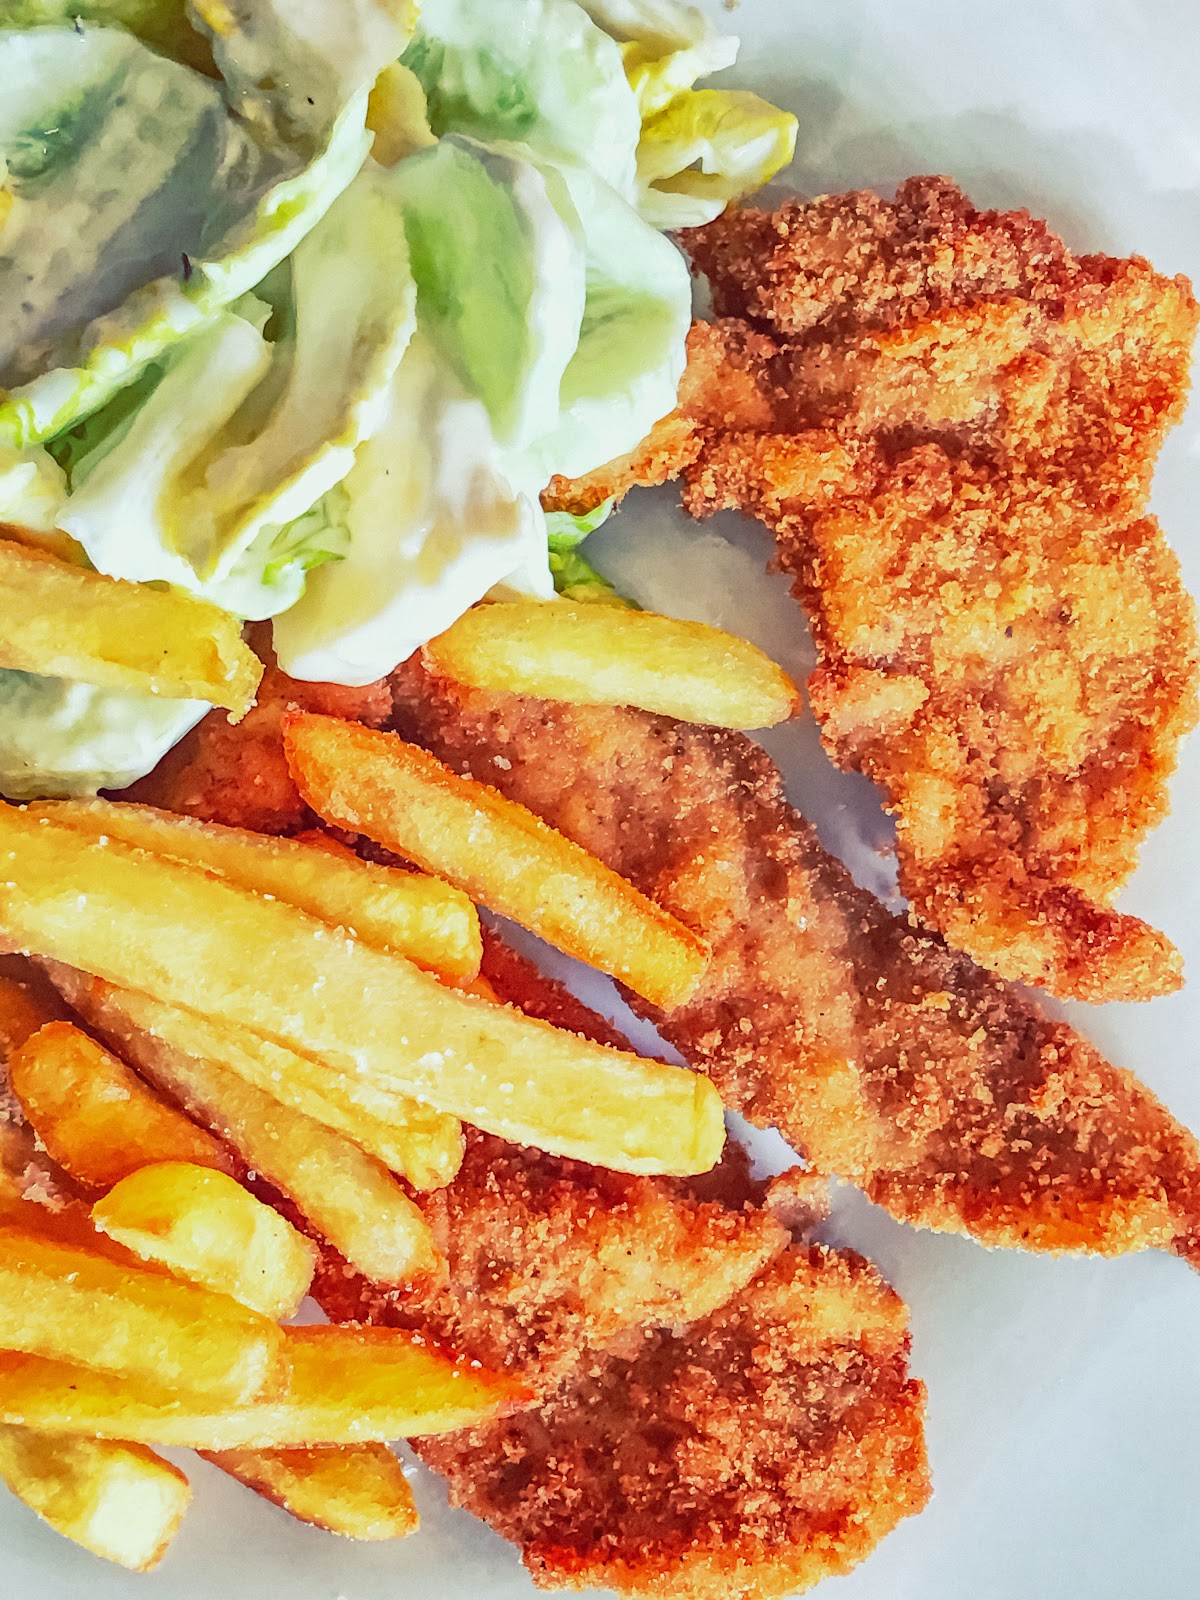 Fried Chicken, Fries and a Salad